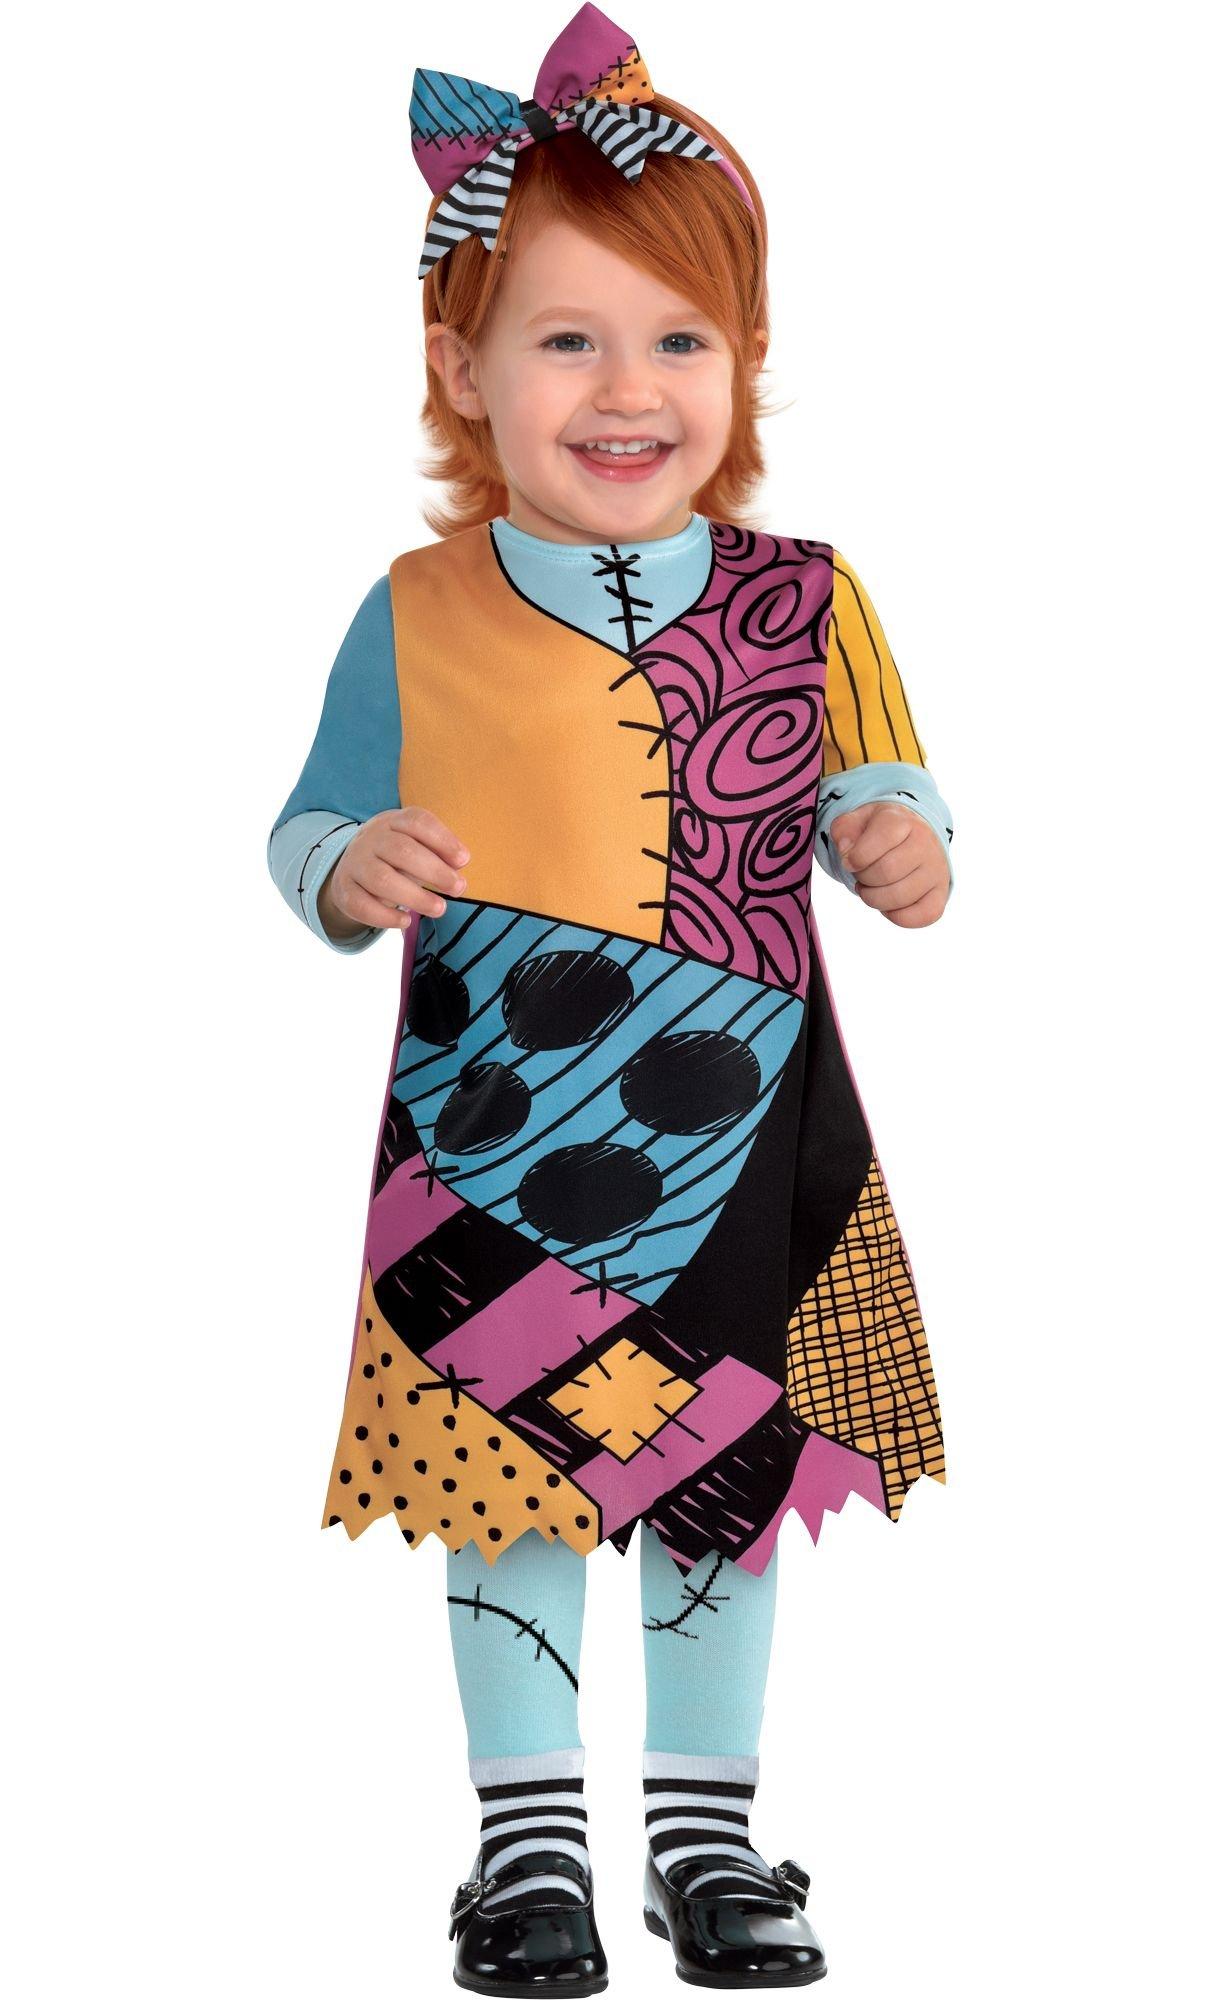 Baby Sally Costume - The Nightmare Before Christmas | Party City